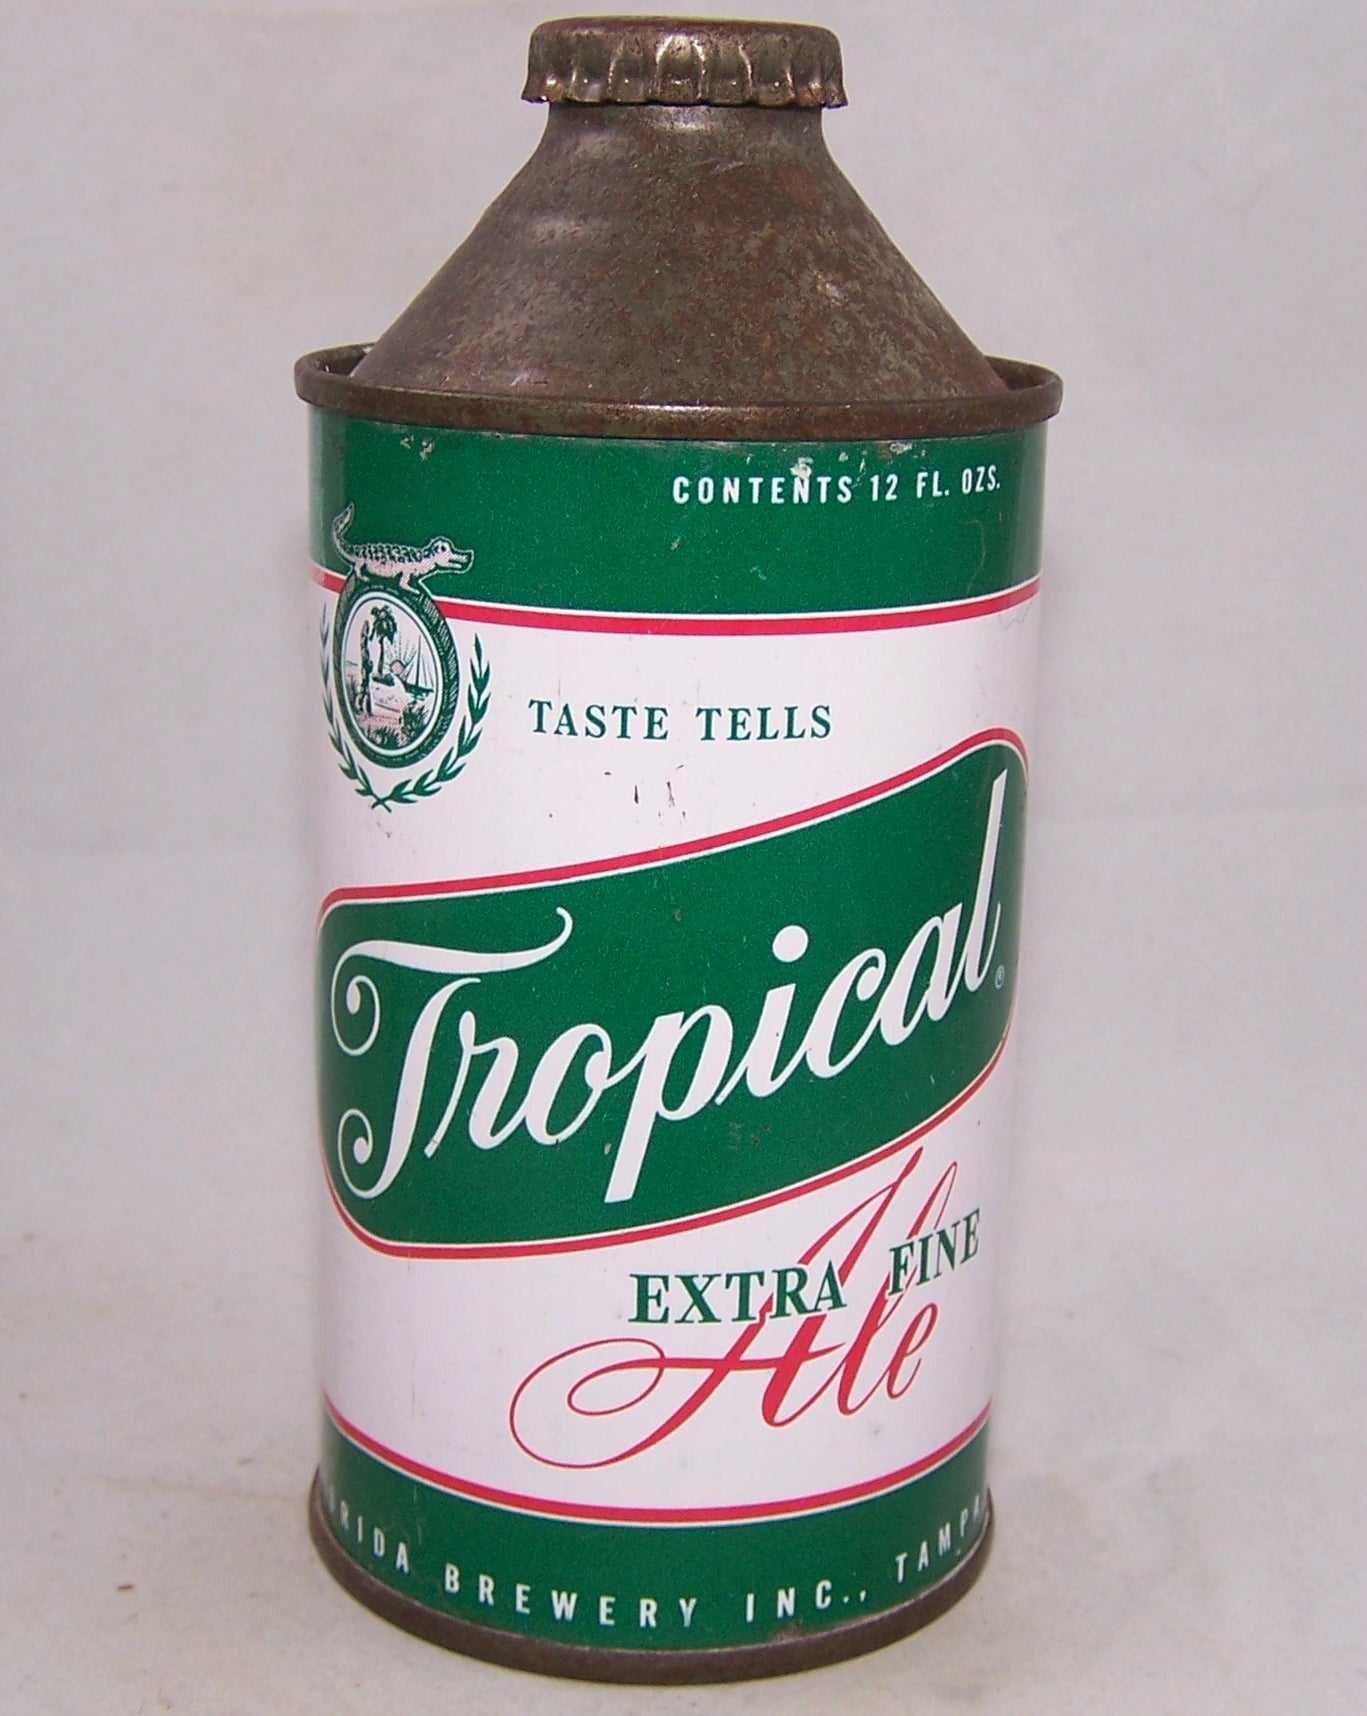 Tropical Extra Fine Ale, USBC 187-18, Grade 1- Sold on 11/20/17